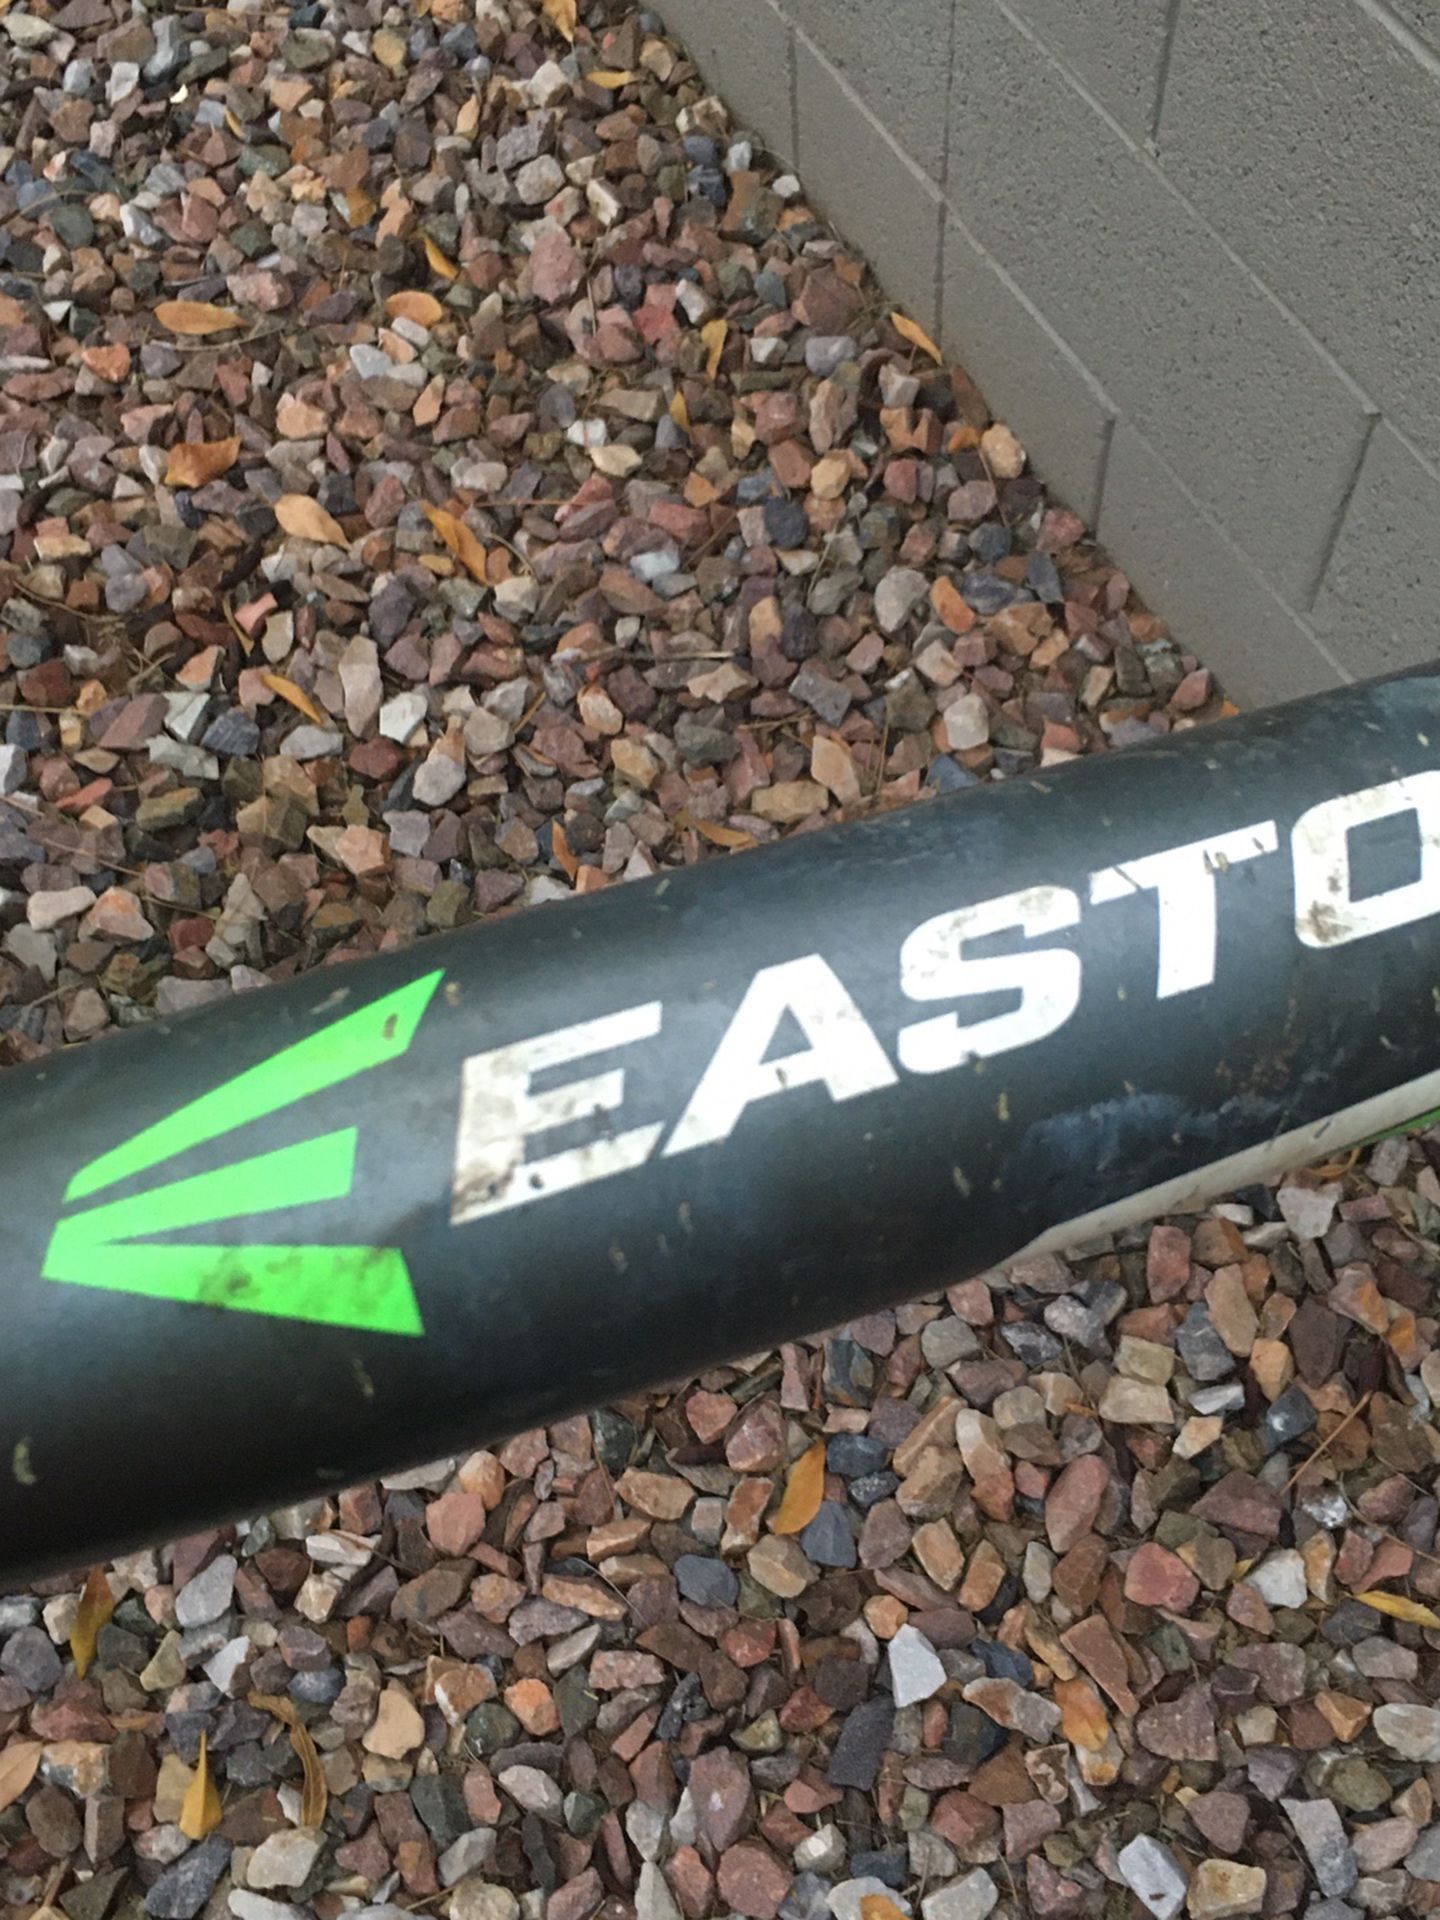 Used Easton XL3 Bat Drop 5 31 Inches And 26ounces